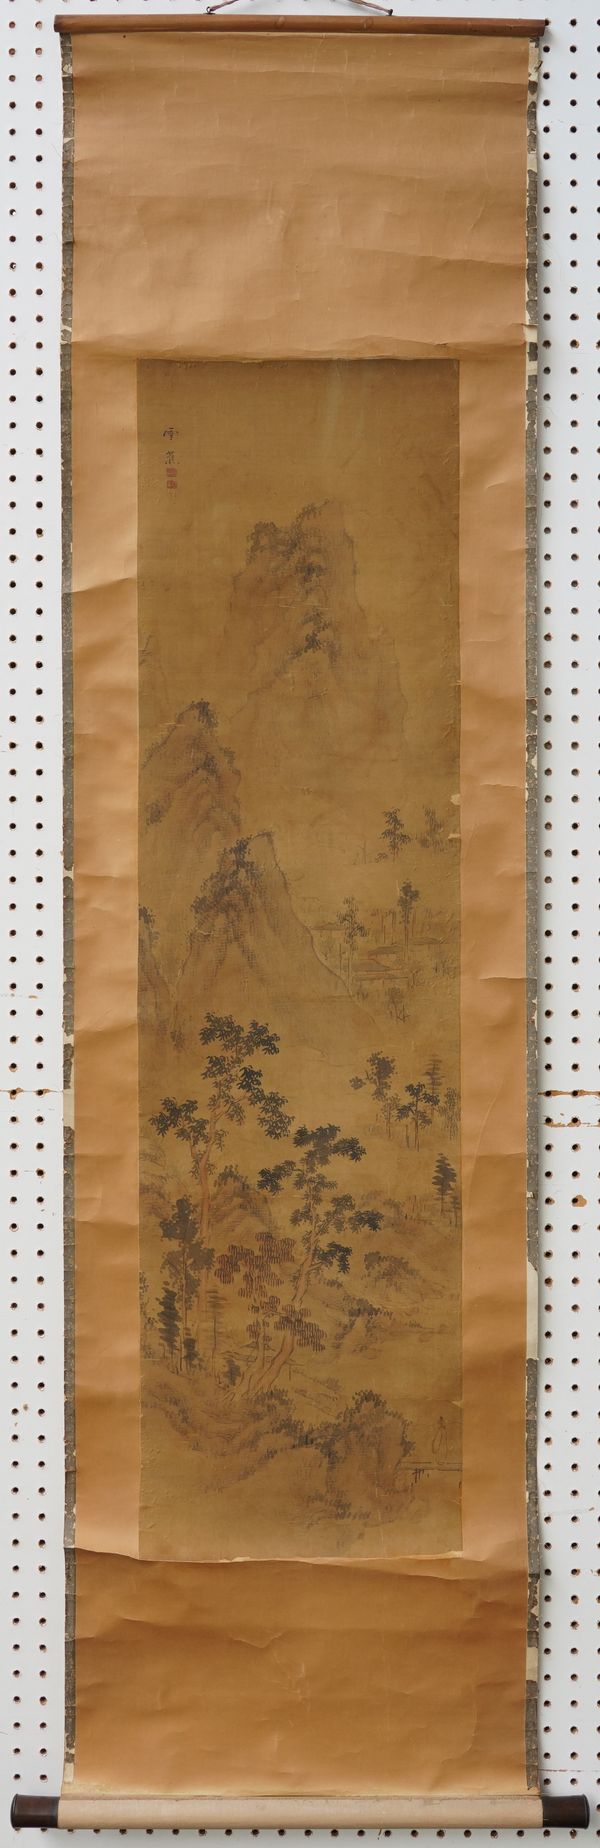 A JAPANESE SCROLL PAINTING